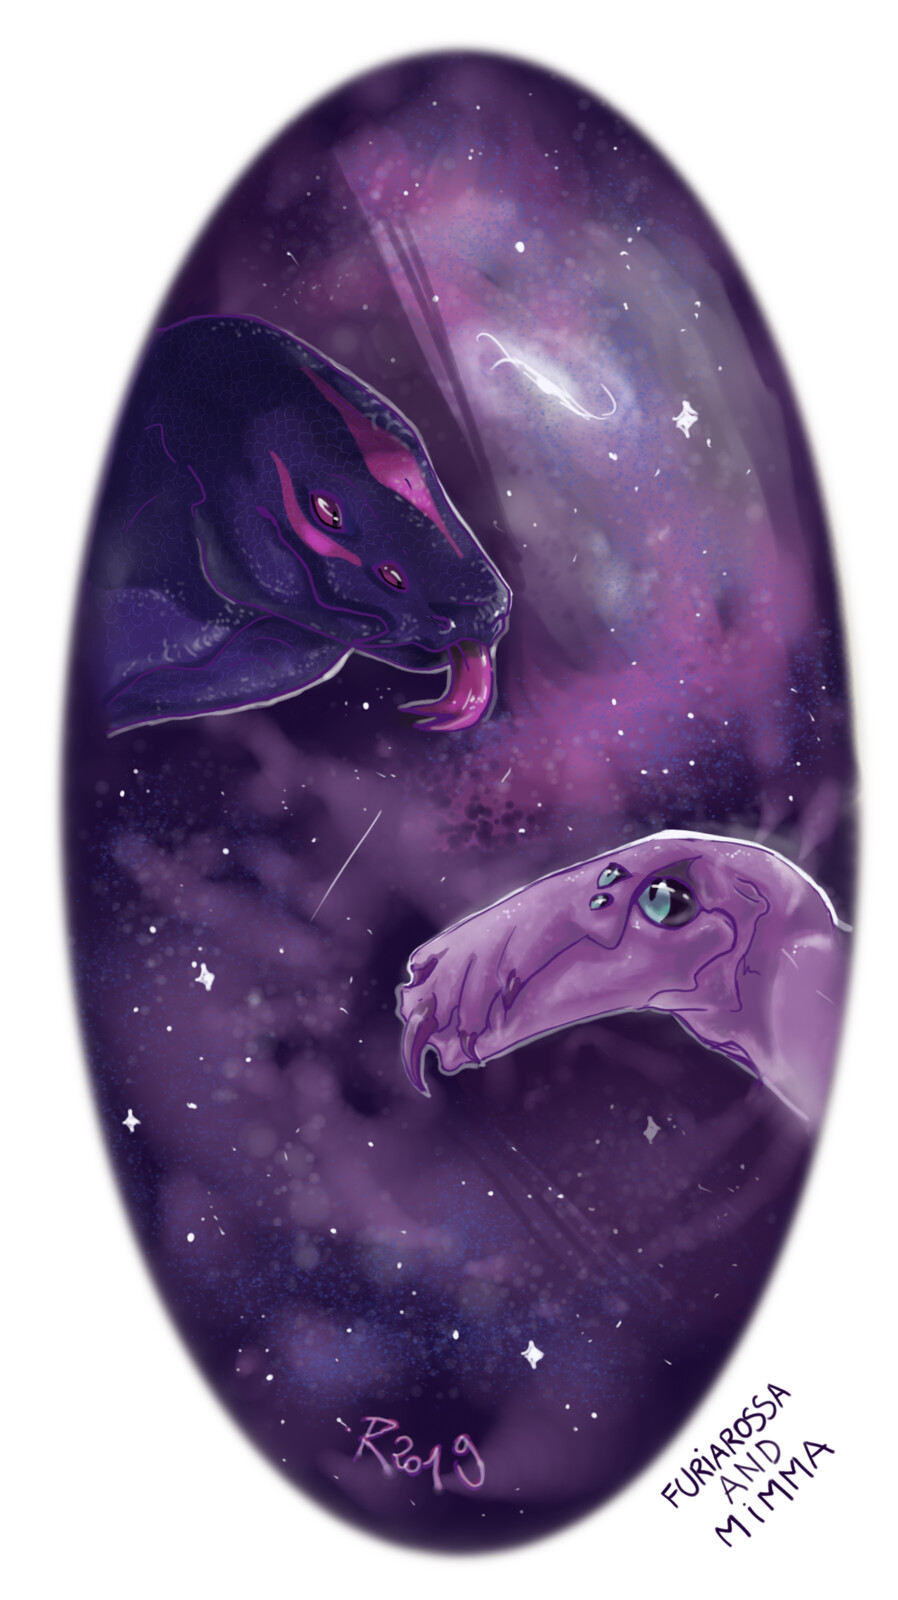 Another ArtFight attack! It's time for some cool alien creatures... our beloved Ta'ruui Sous-Chef with Misha,s Sushi! Also, purple-ish color palettes are cool.